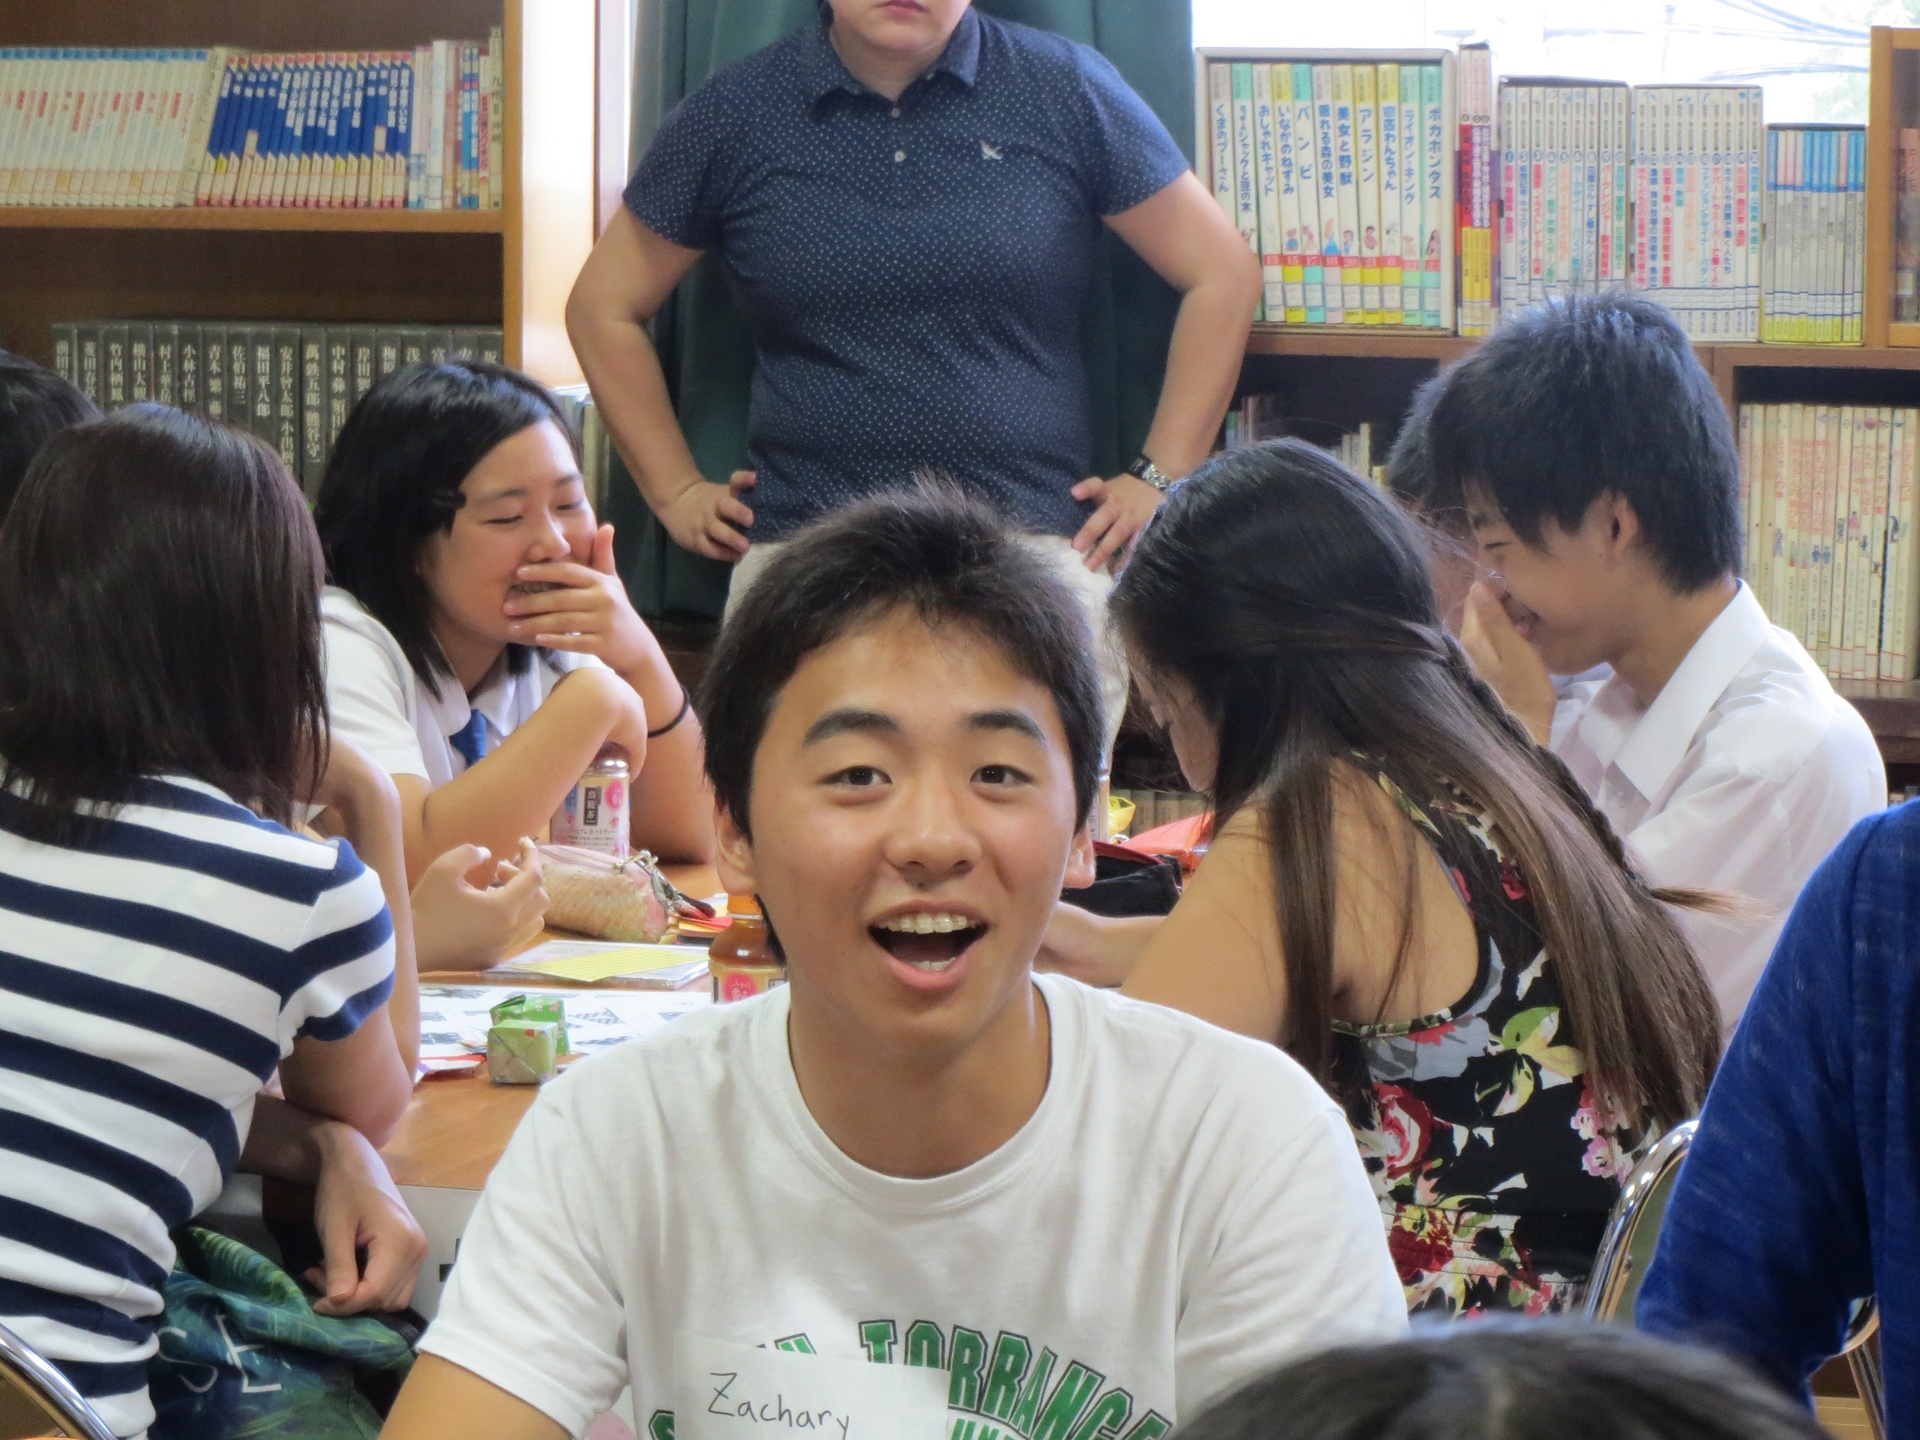 Student smiling in classroom with other students in background